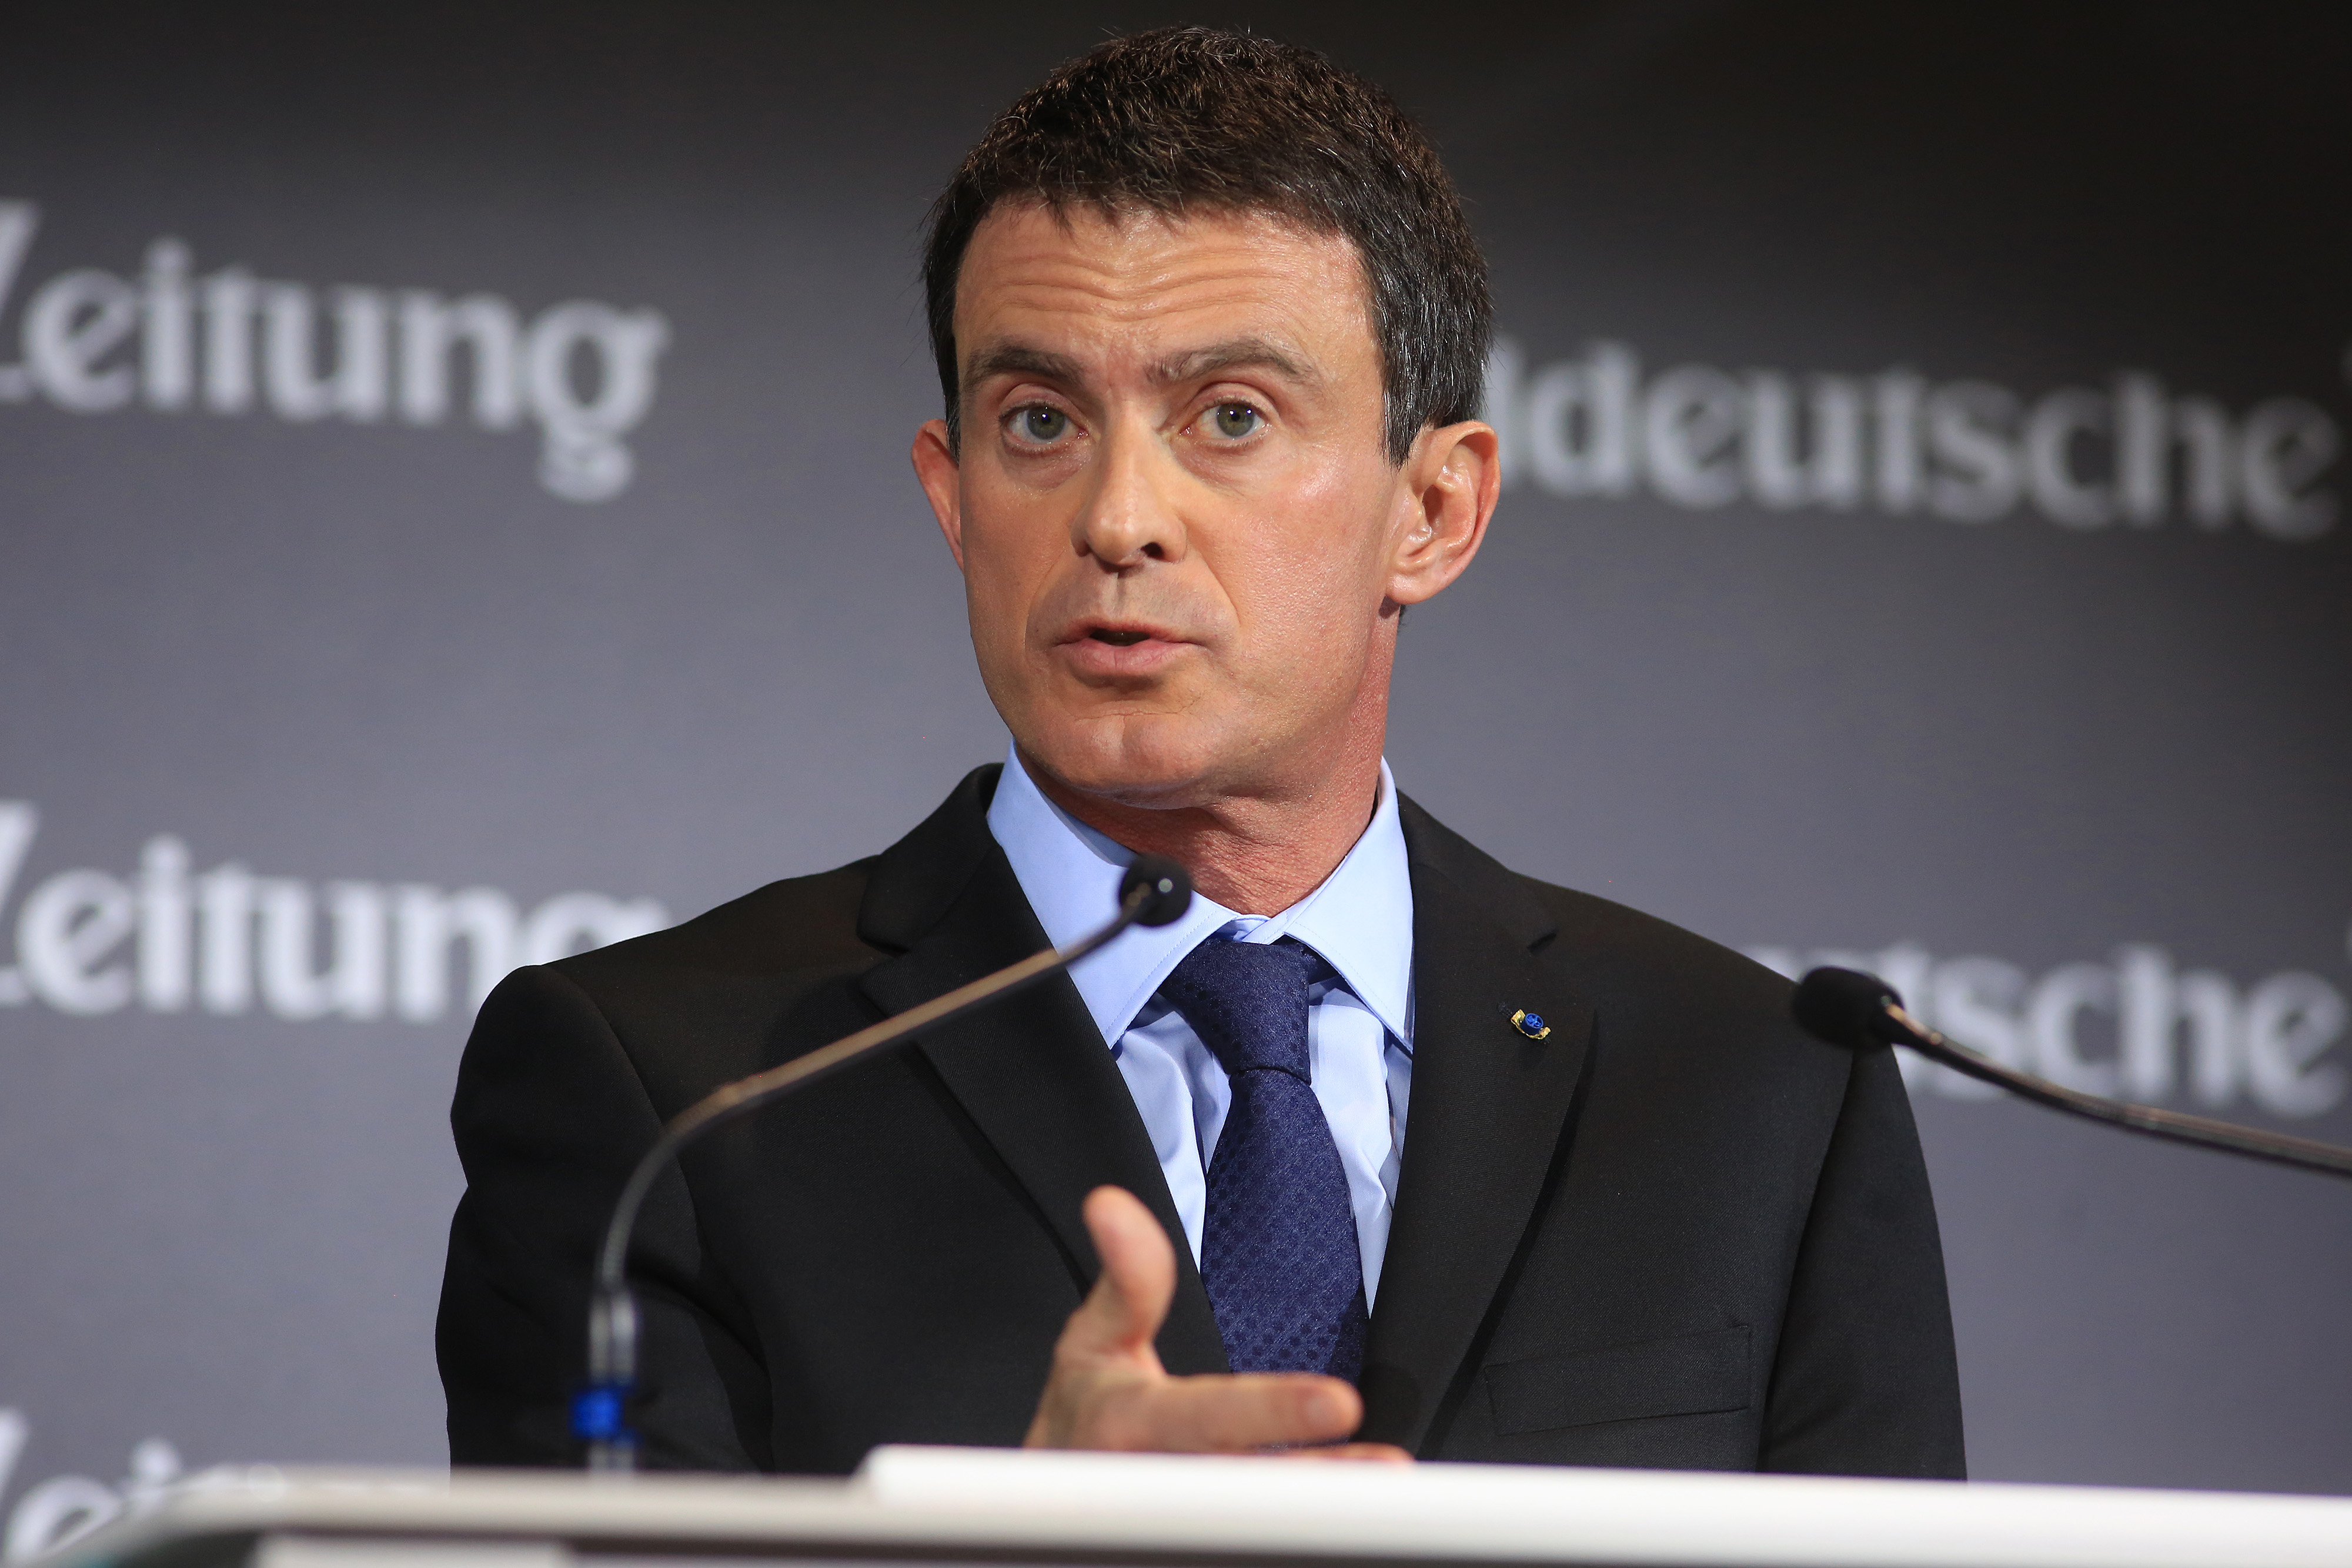 Manuel Valls, France's prime minister, speaks during the Sueddeutsche Zeitung Economic Summit in Berlin, Germany, on Nov. 17, 2016. (Bloomberg—Bloomberg via Getty Images)